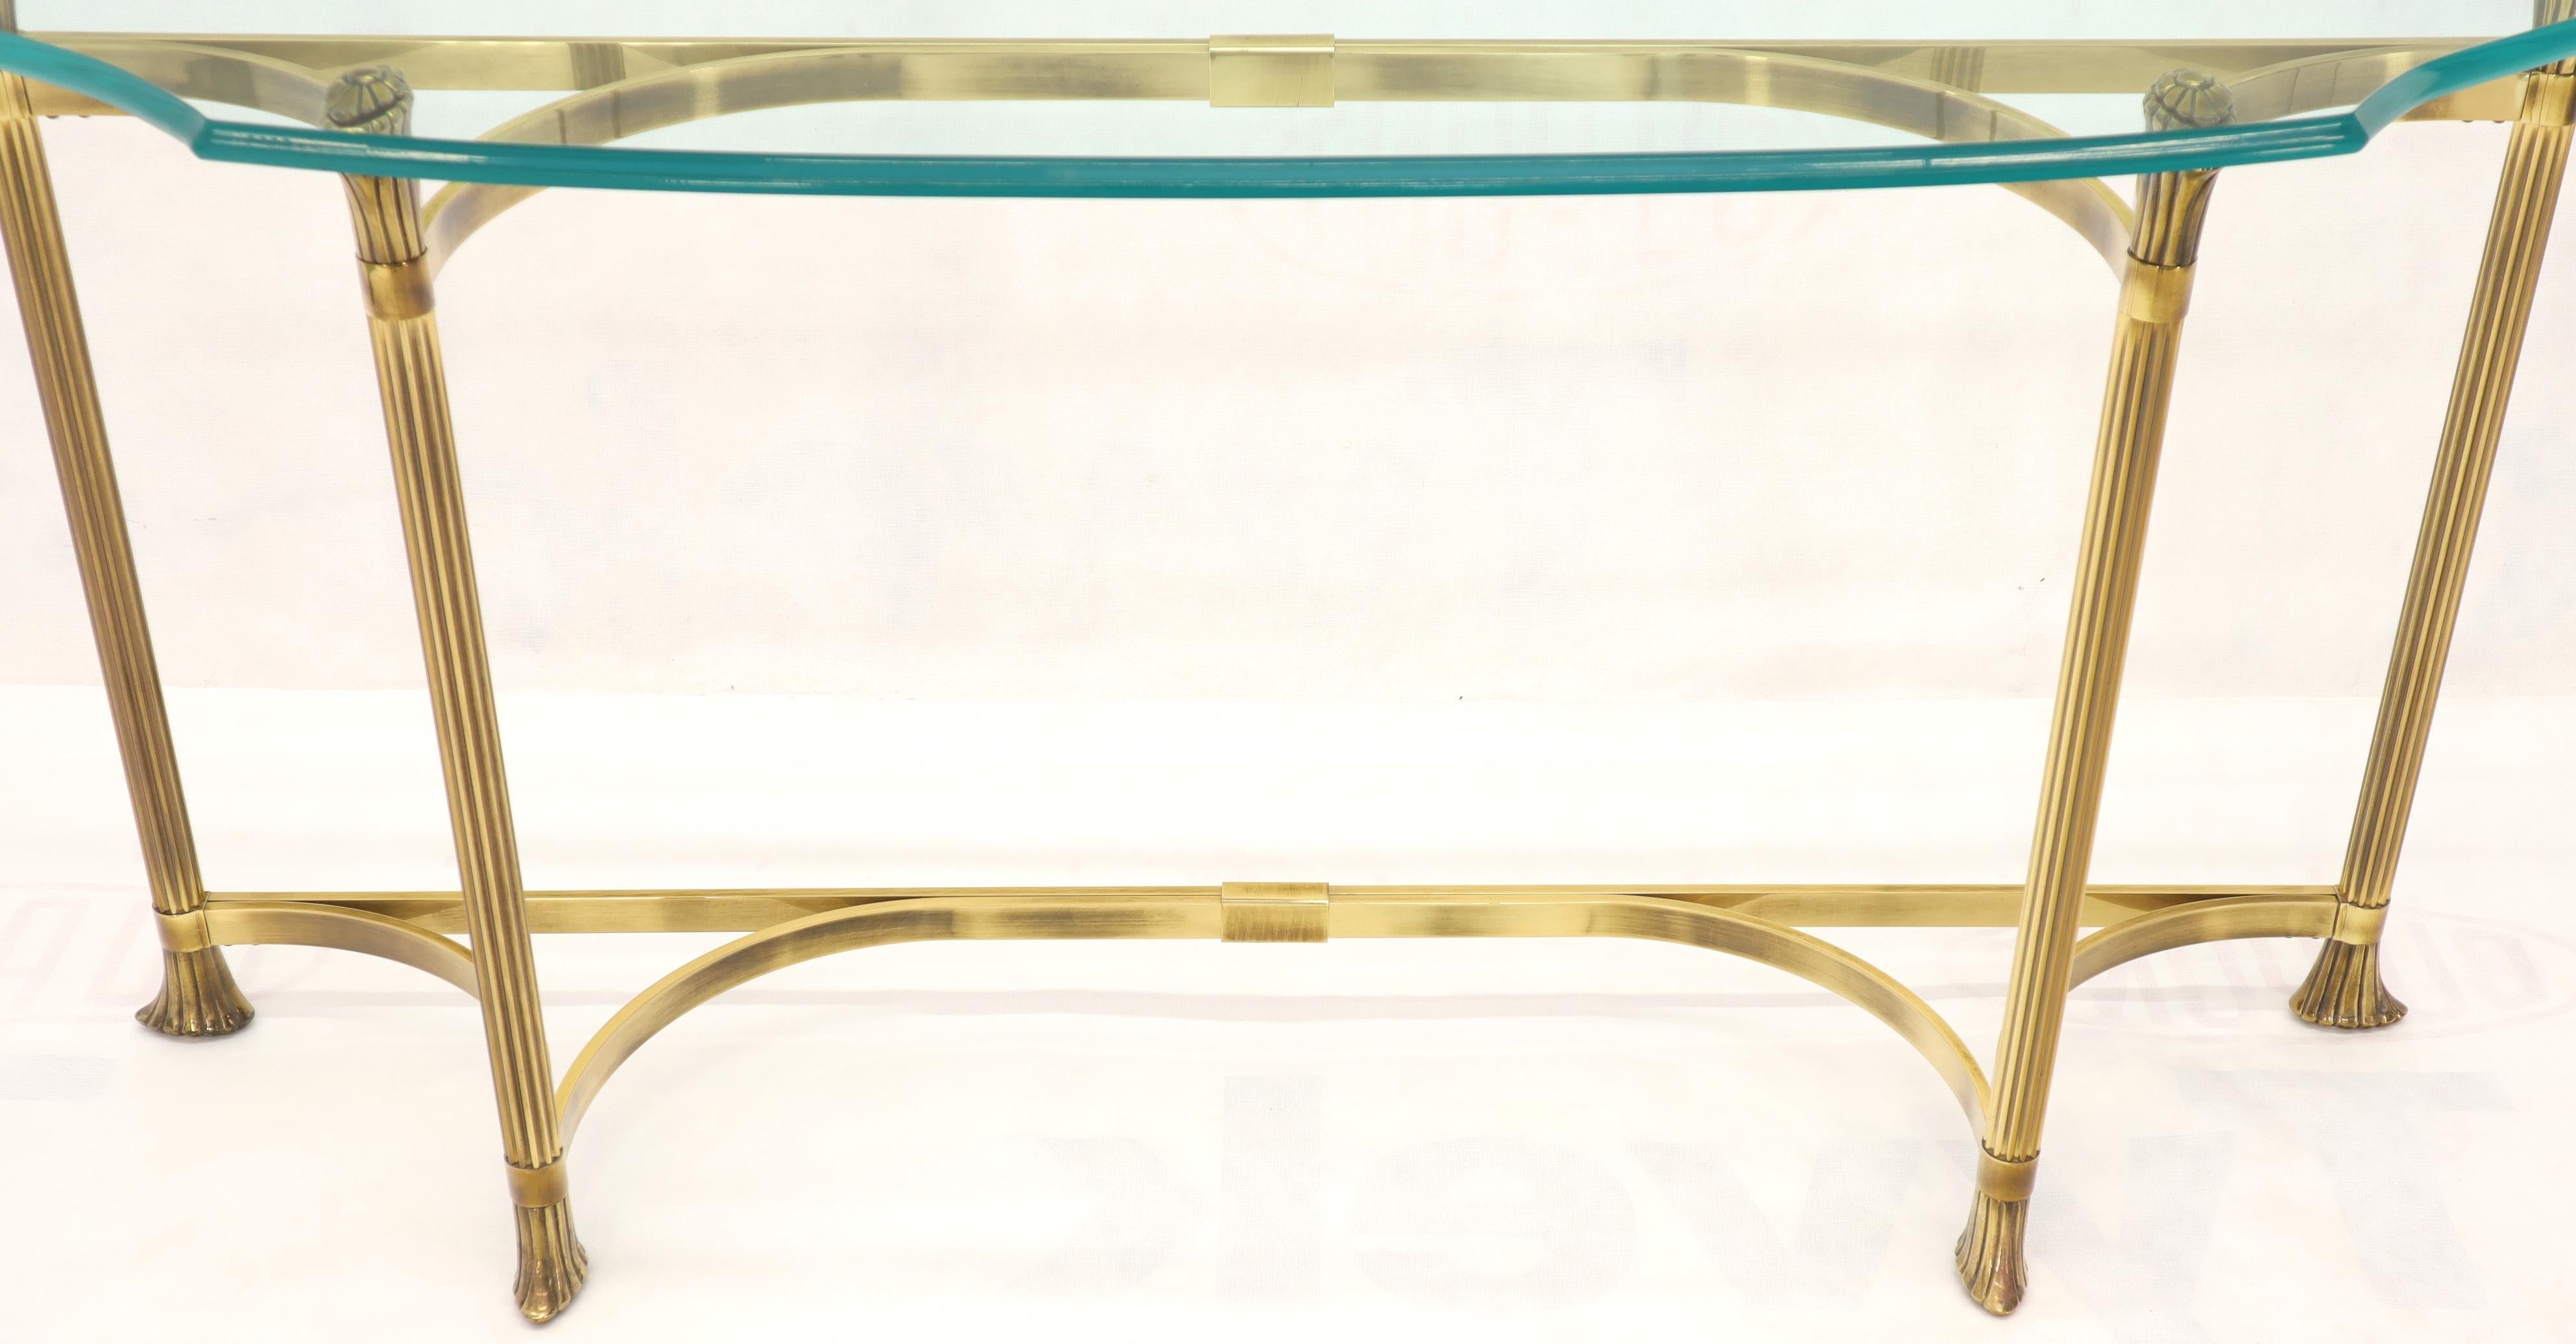 Bent Brass Base Curved Glass Top Figural Console Sofa Table 1